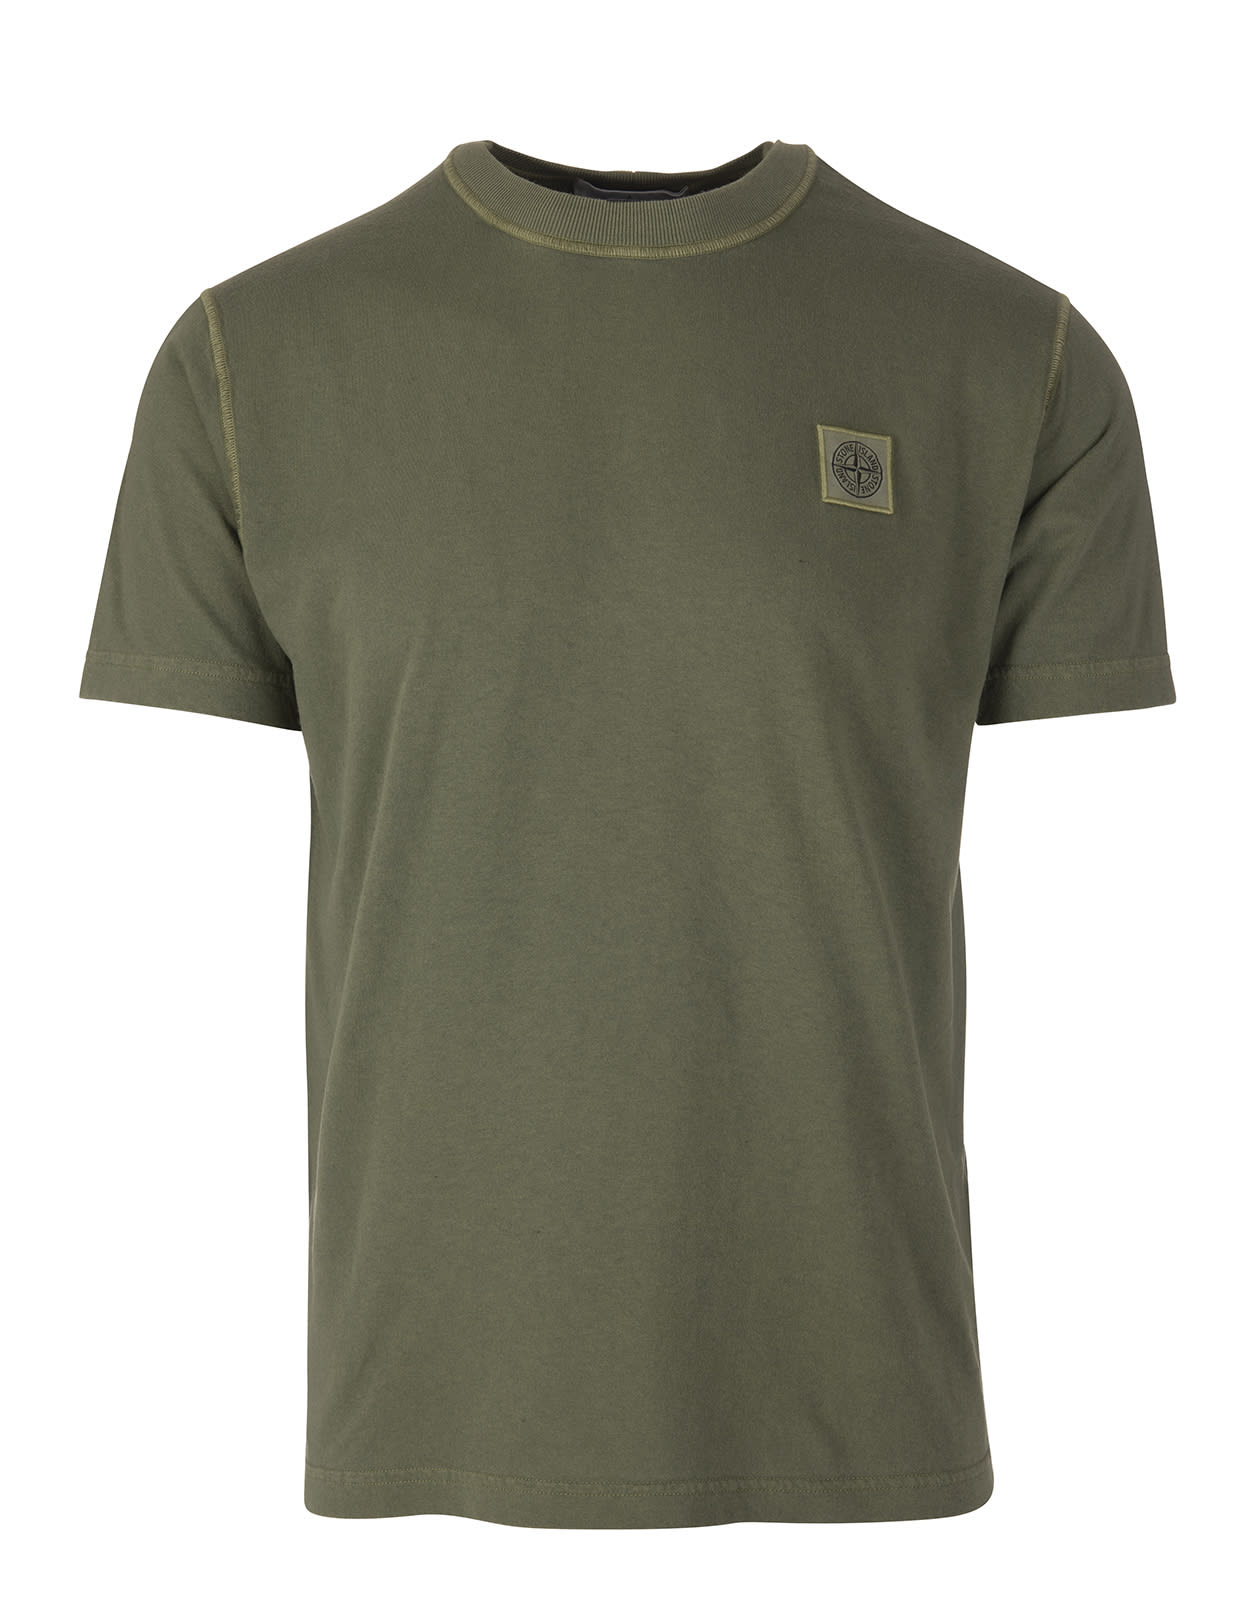 Man Regular Fit Olive Green T-shirt With Compass Rose Stone Island Patch